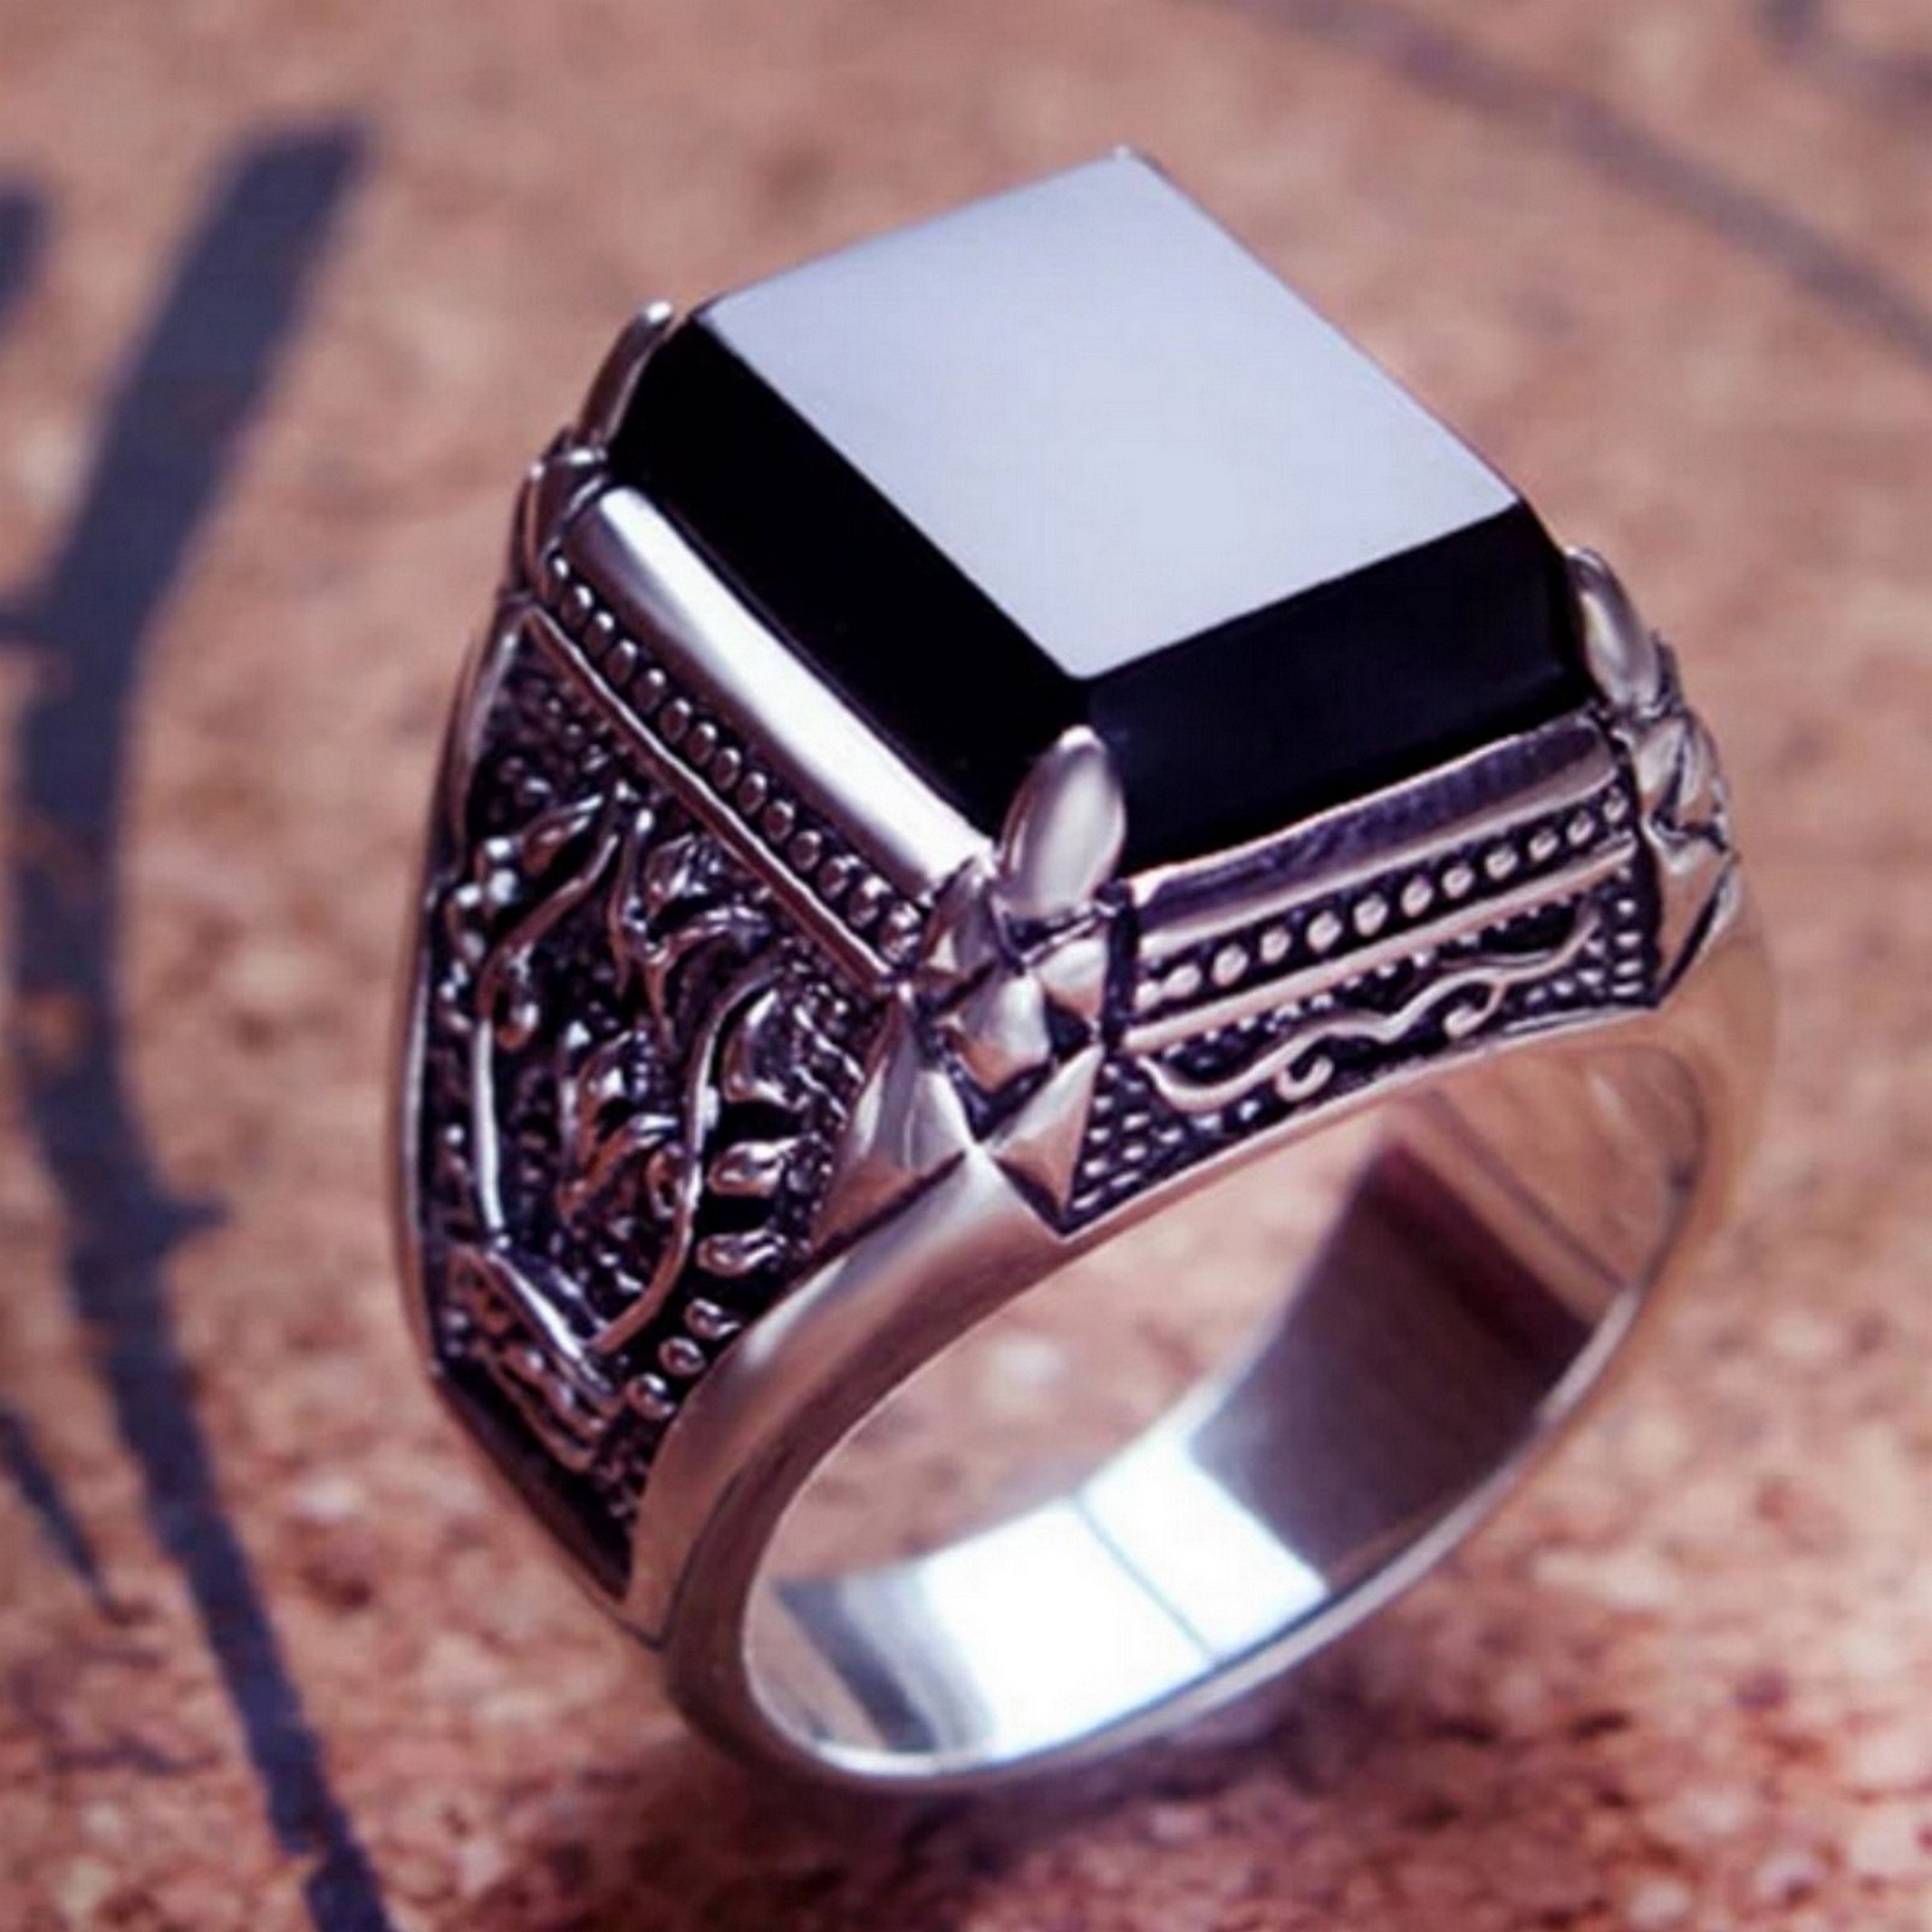 Stone Rings: Black Onyx Solid Sterling Silver Men's Ring - r060